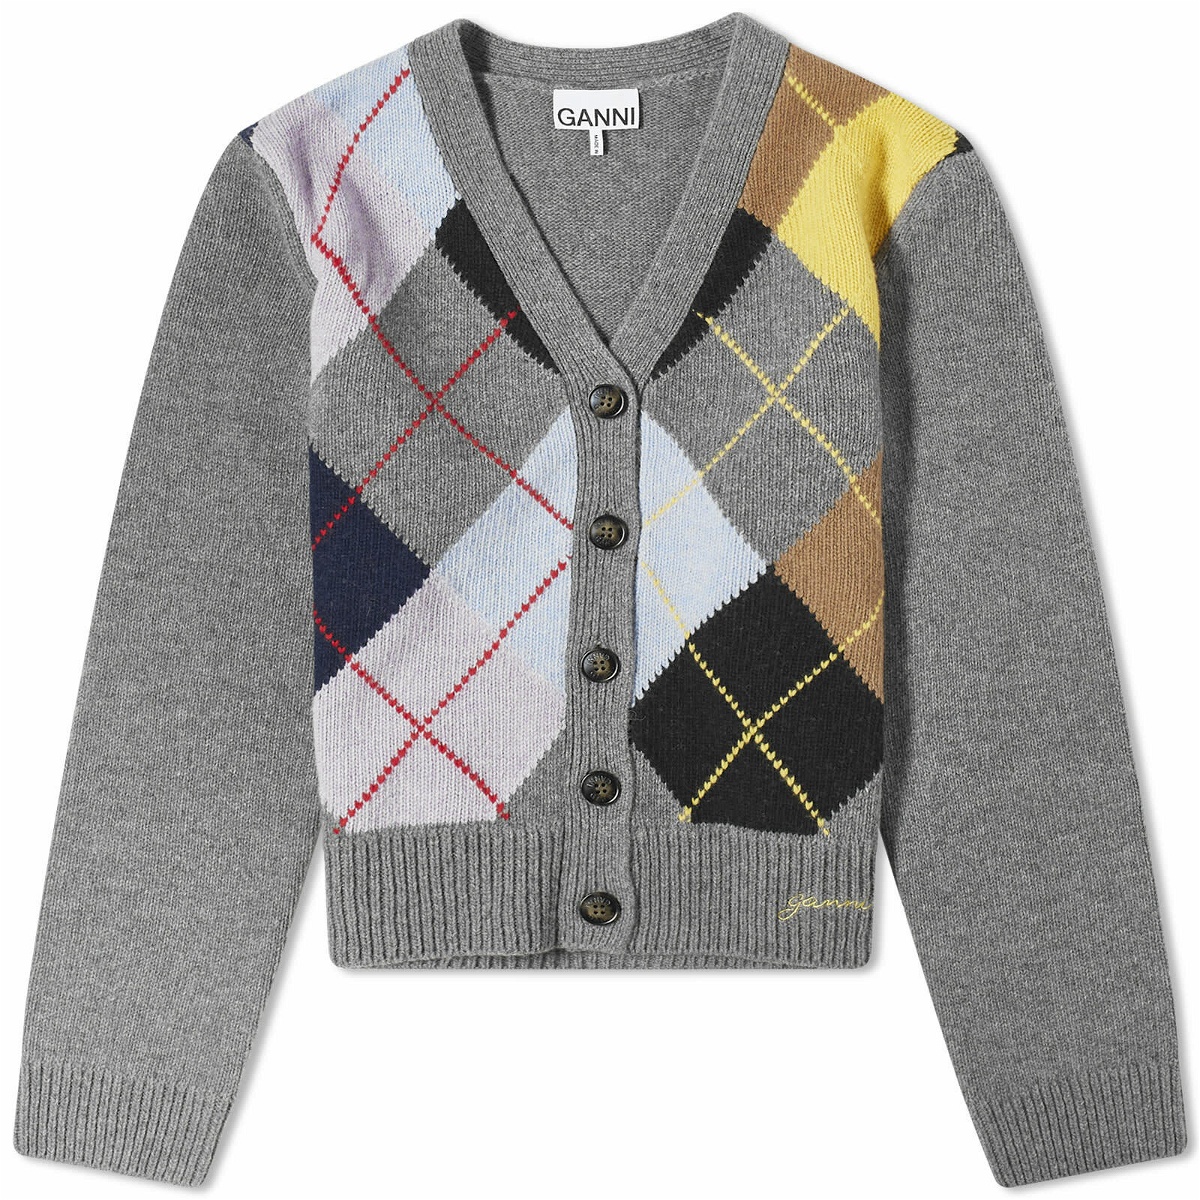 Photo: GANNI Women's Harlequin Wool Mix Knit Cardigan in Frost Gray